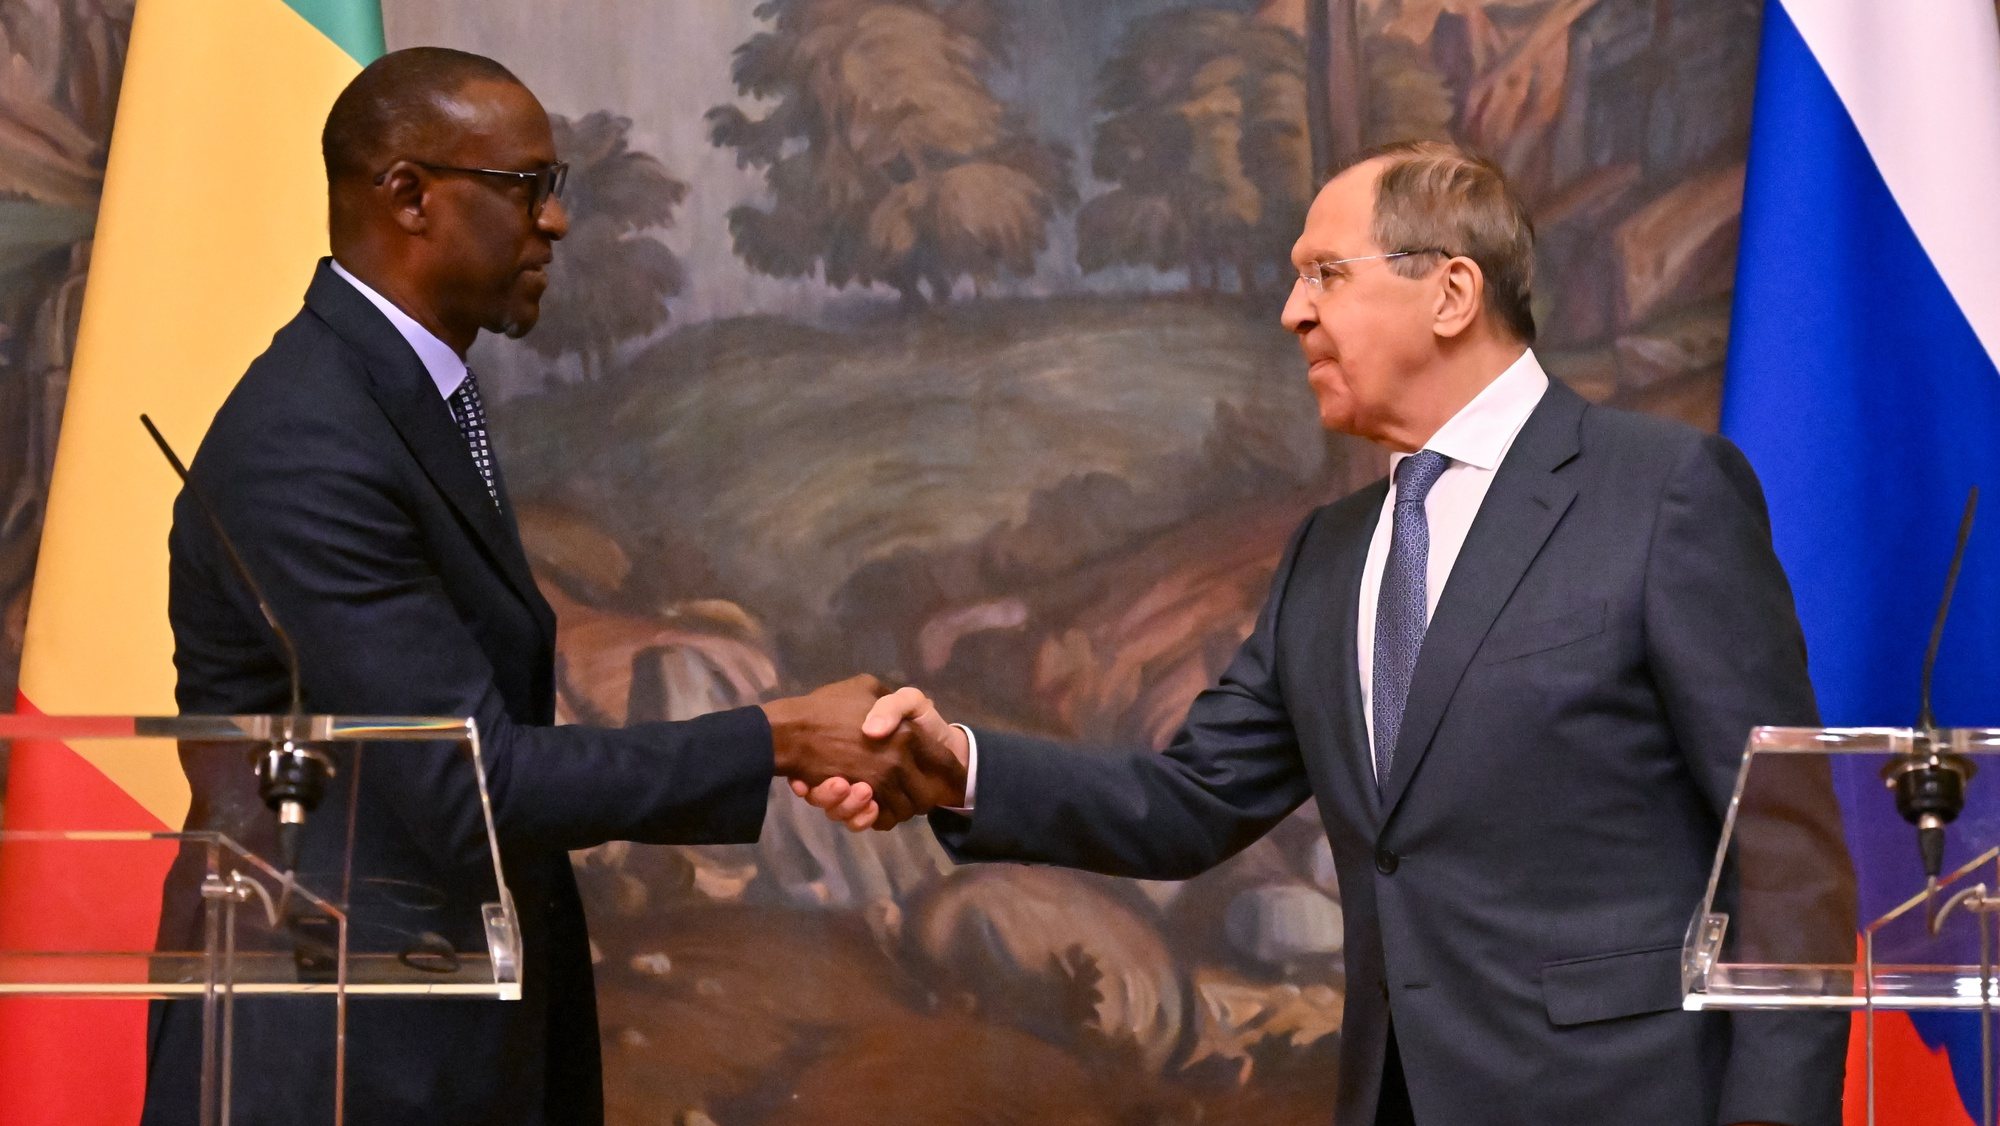 epa09960481 Russian Foreign Minister Sergei Lavrov (R) and his Malian counterpart Abdoulaye Diop (L) shake hands during a joint news conference following their talks in Moscow, Russia, 20 May 2022. Malian Foreign Minister is on a working visit in Moscow.  EPA/YURI KADOBNOV / POOL